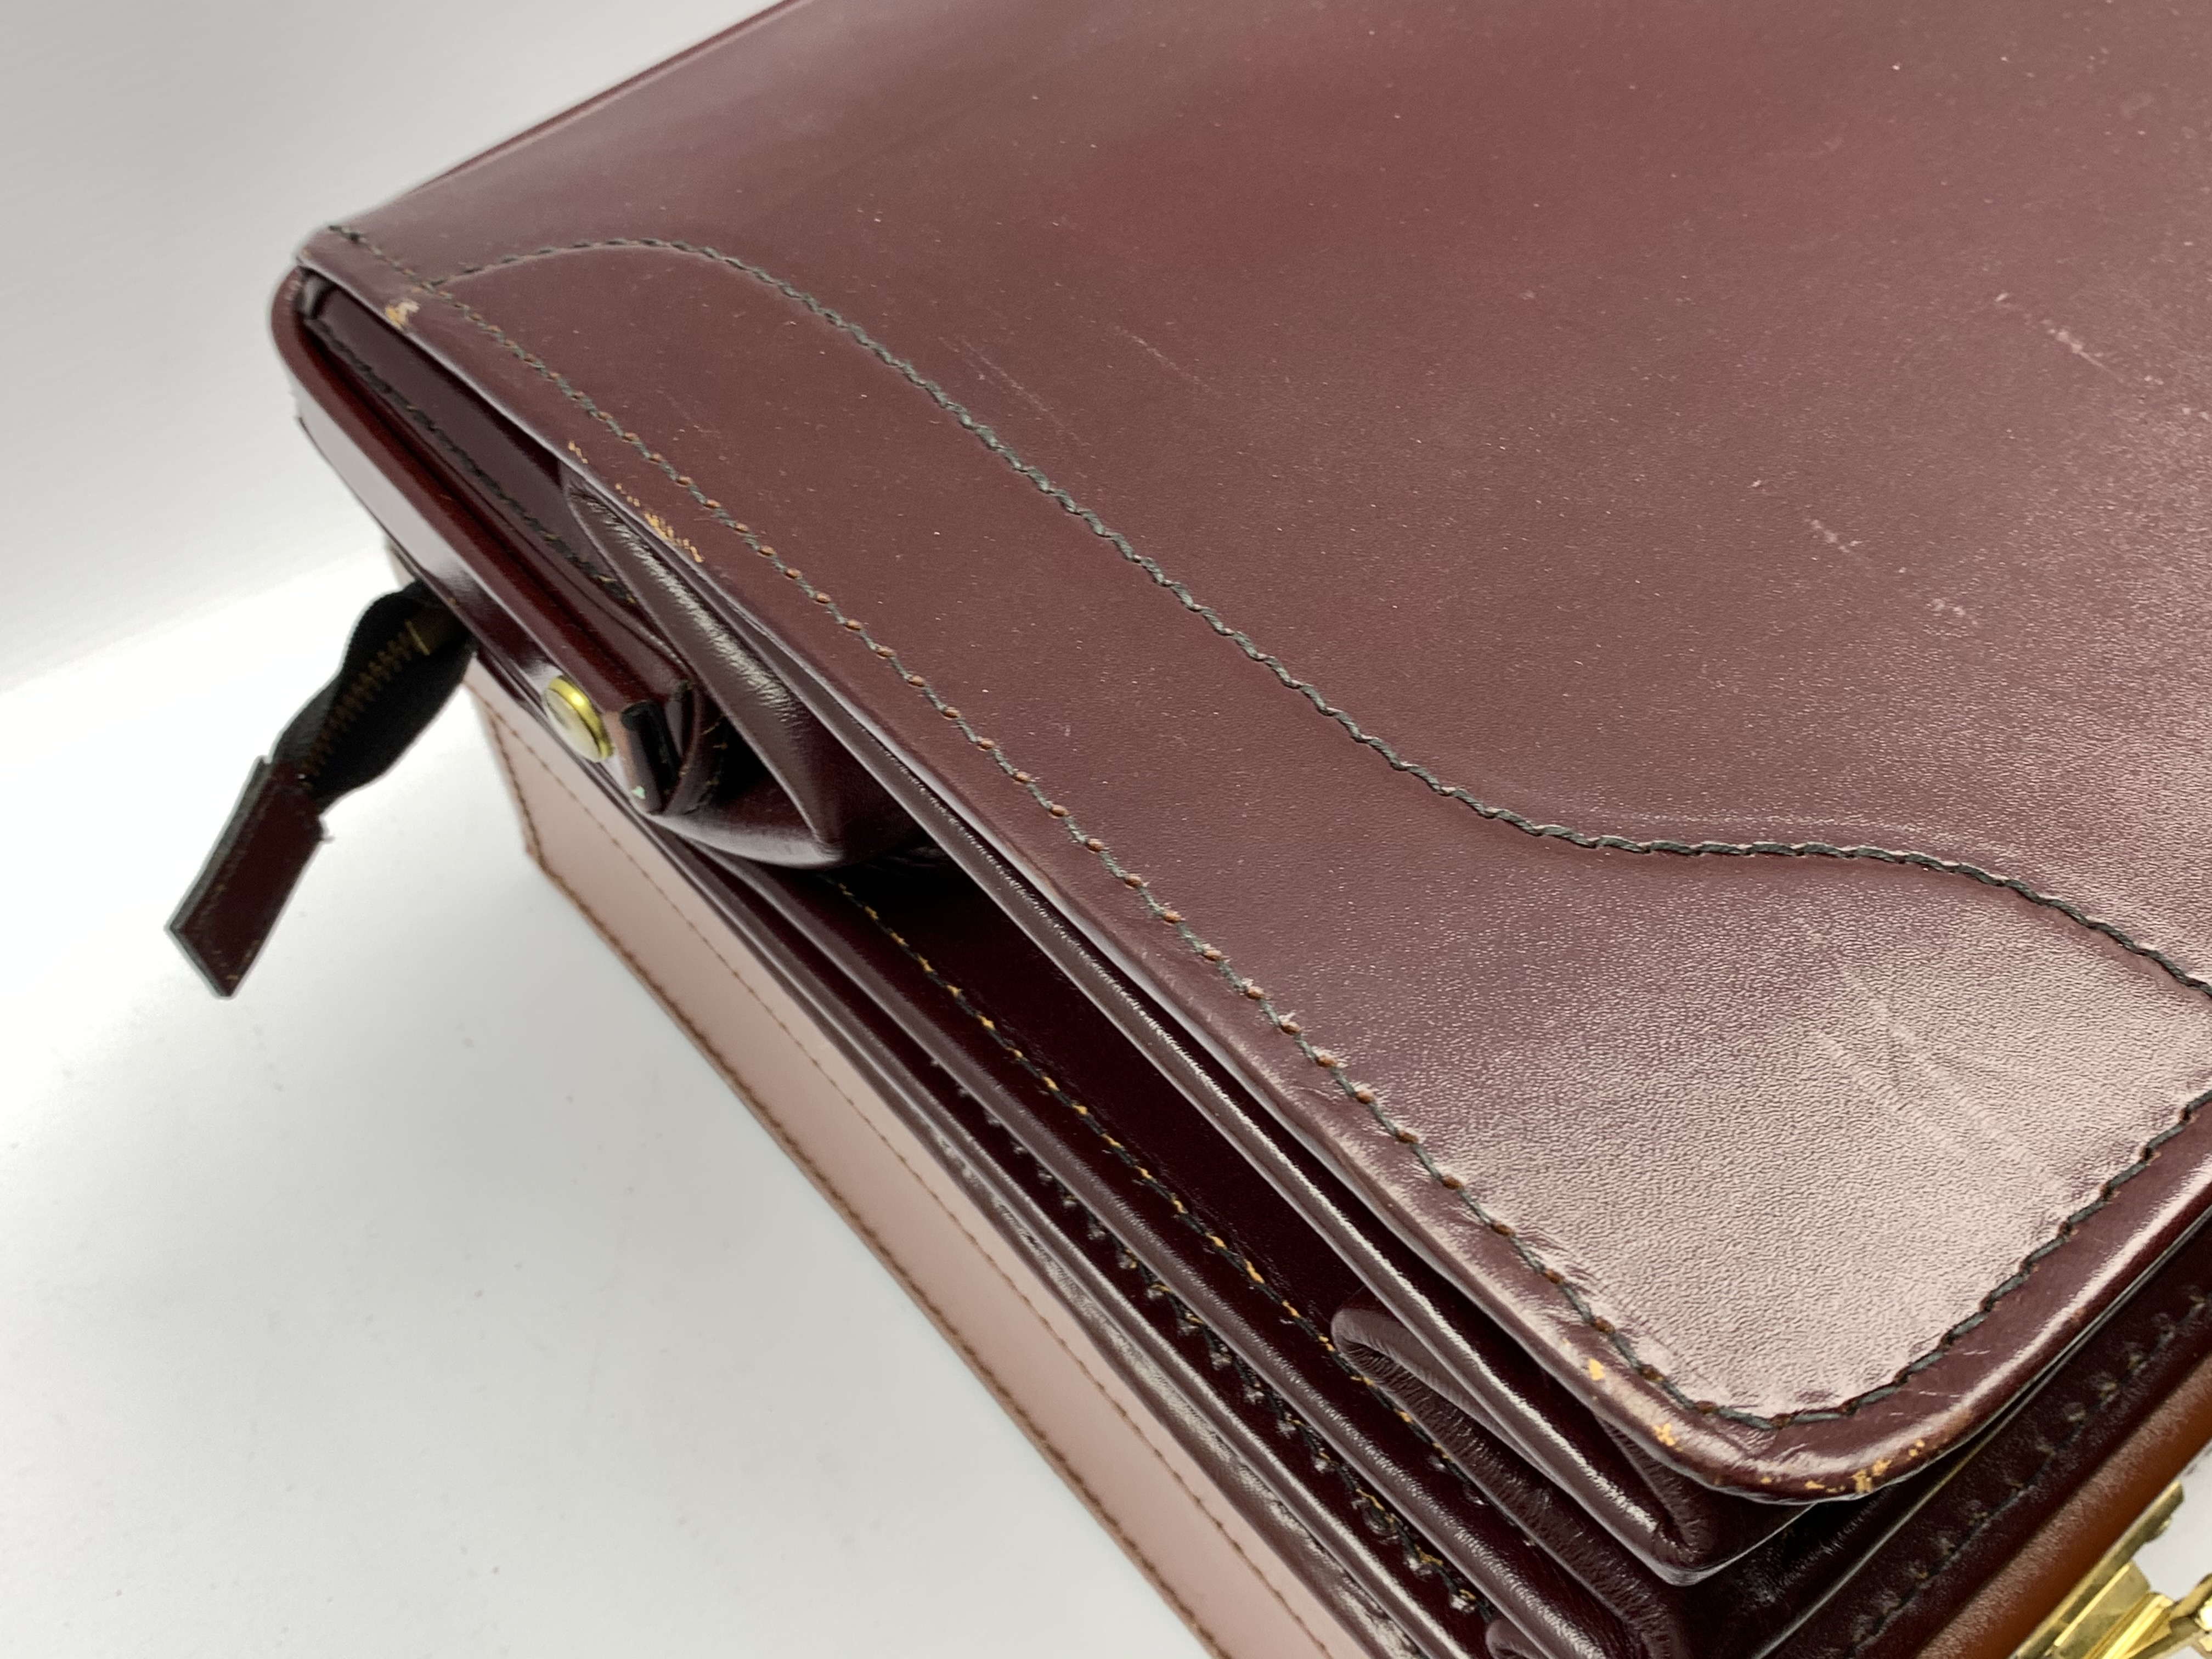 Papworth of Cambridge leather briefcase and document case, together with a Pendragon cow hide attach - Image 2 of 3